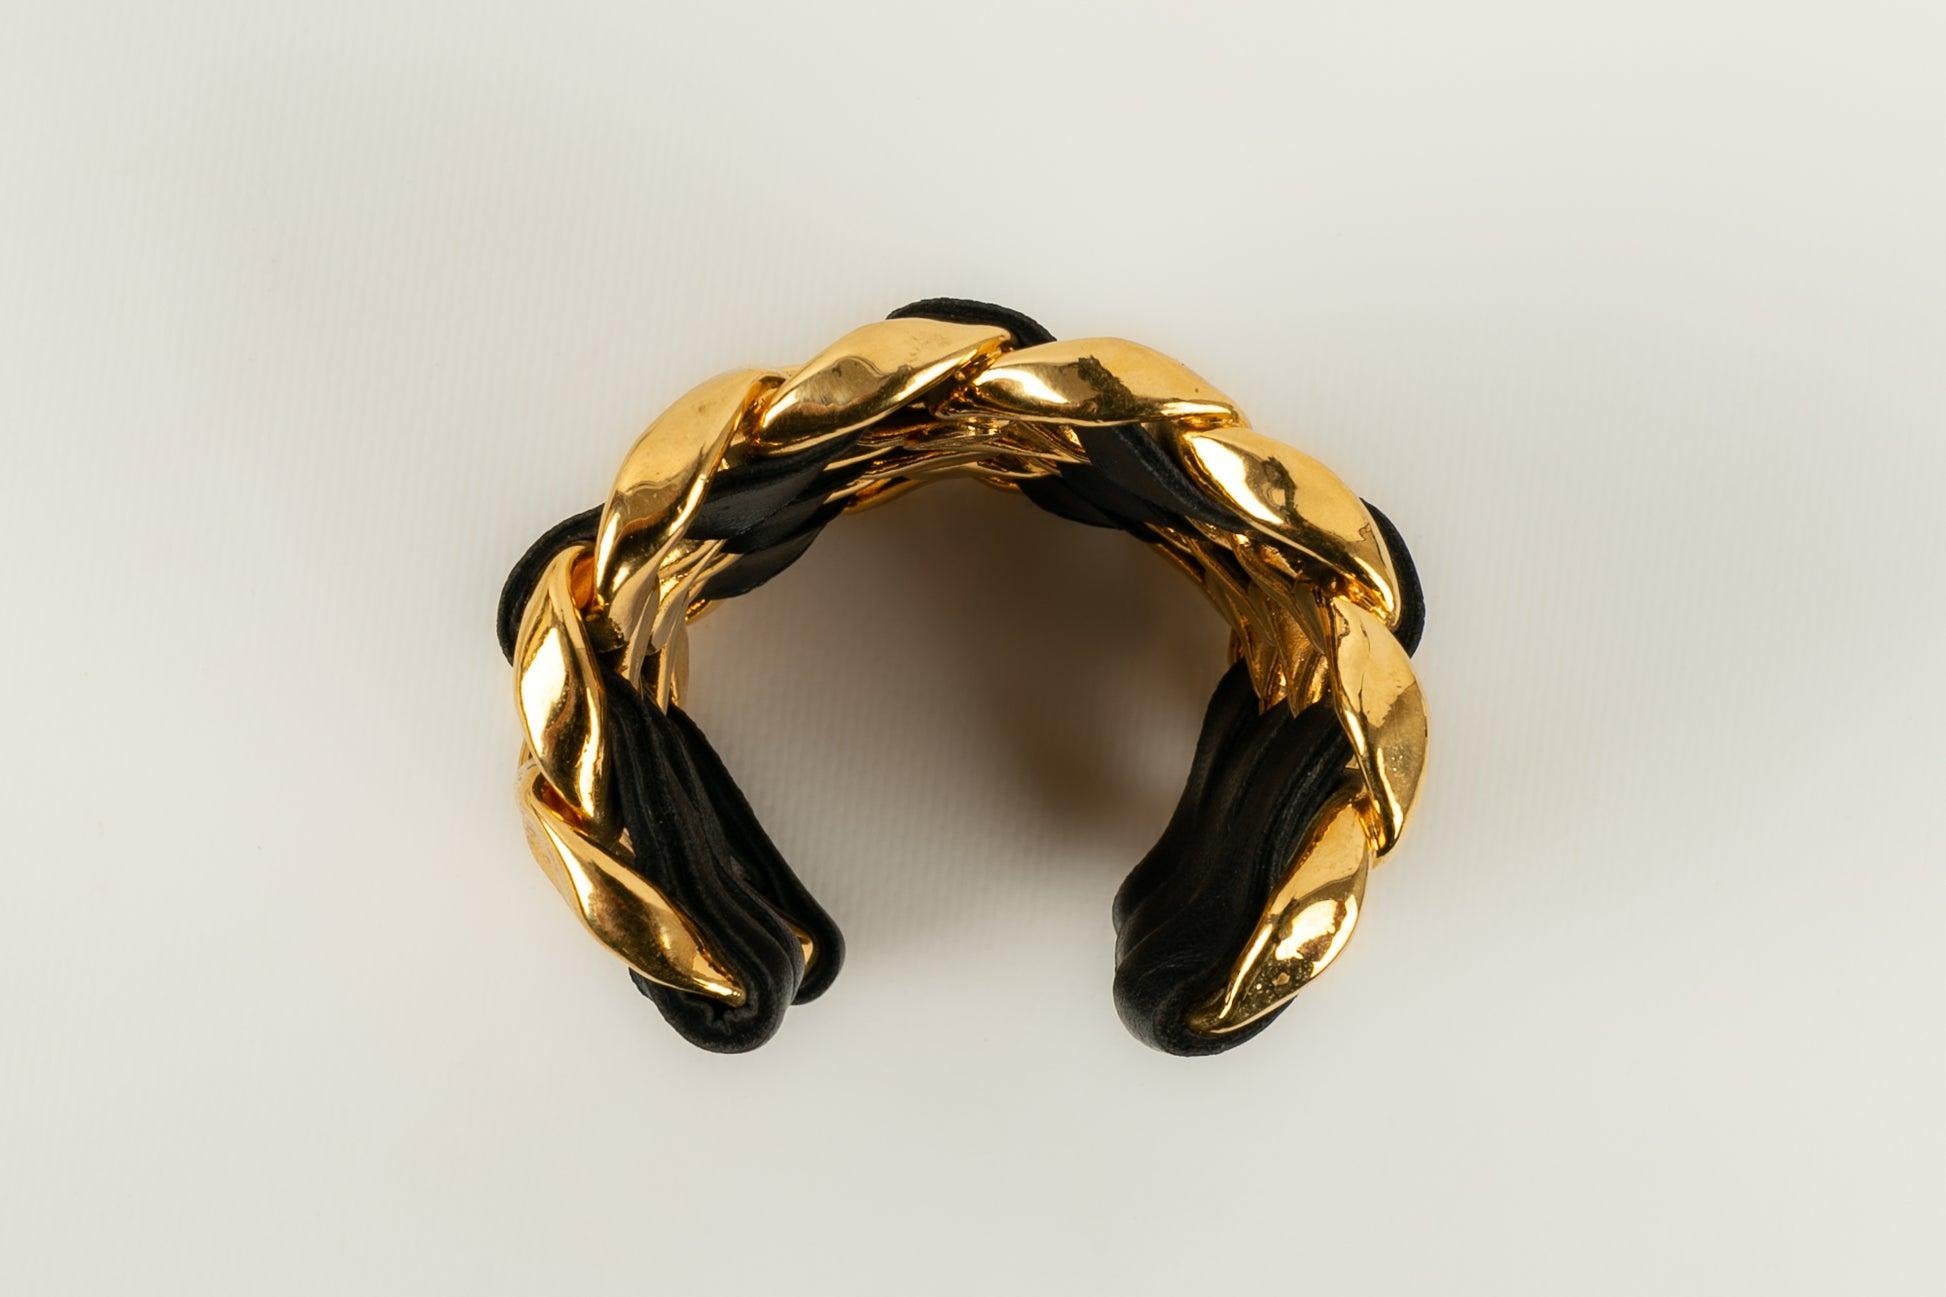 Chanel - (Made in France) Cuff bracelet in golden metal and black leather. 2cc3 Collection.

Additional information:
Condition: Very good condition
Dimensions: Wrist circumference: 14 cm - Opening: 3 cm - Length: 8 cm

Seller Reference: BRAB38
